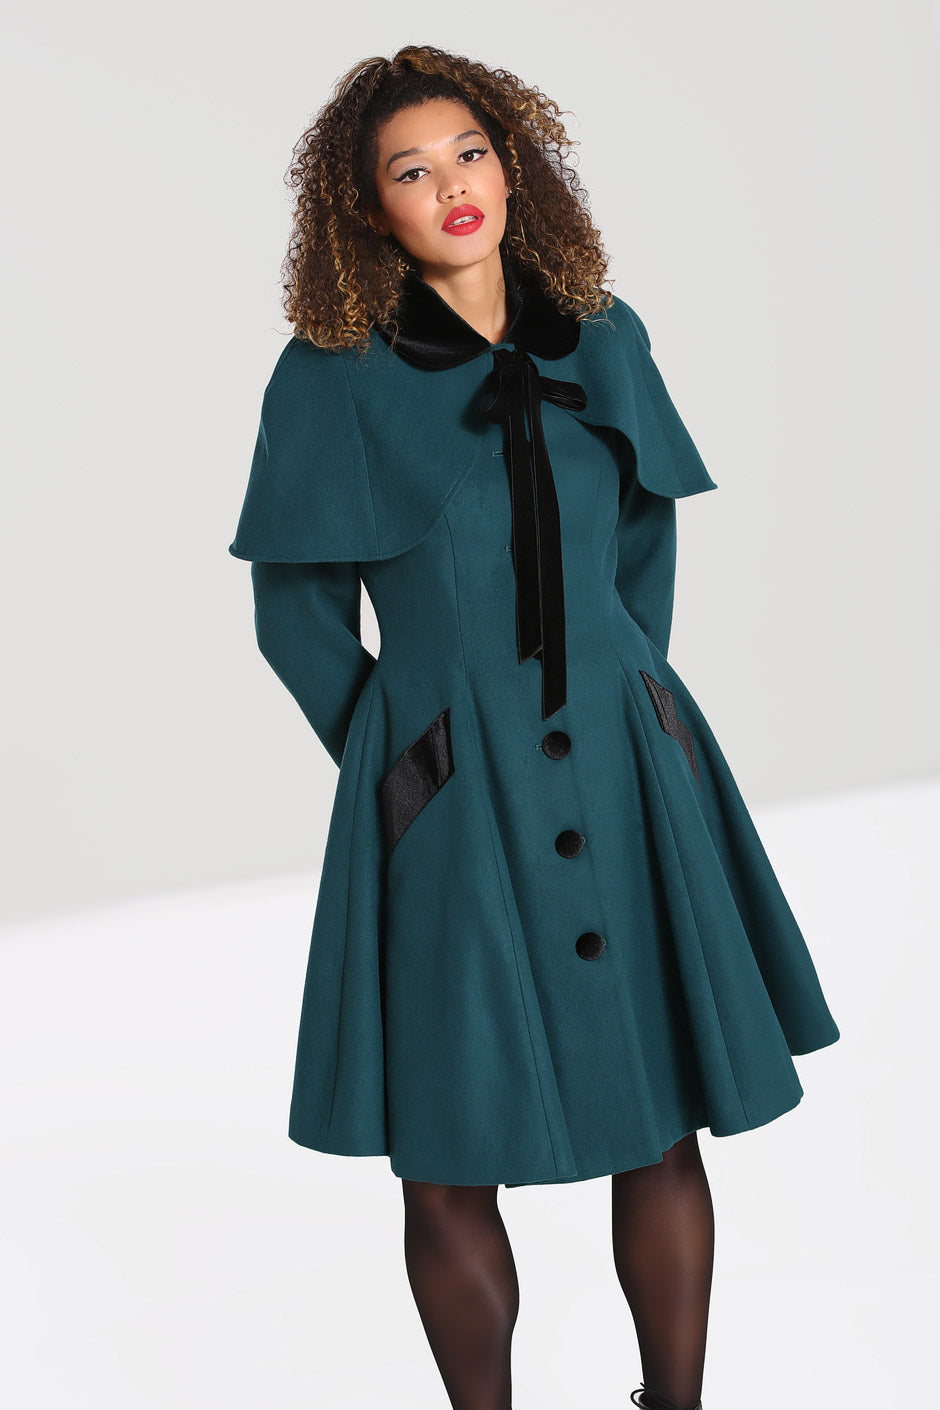 Glamorous woman with curly brown hair and 50s makeup wearing a dark green vintage style swing coat and a shoulder cape tied at the neck with a velvet bow